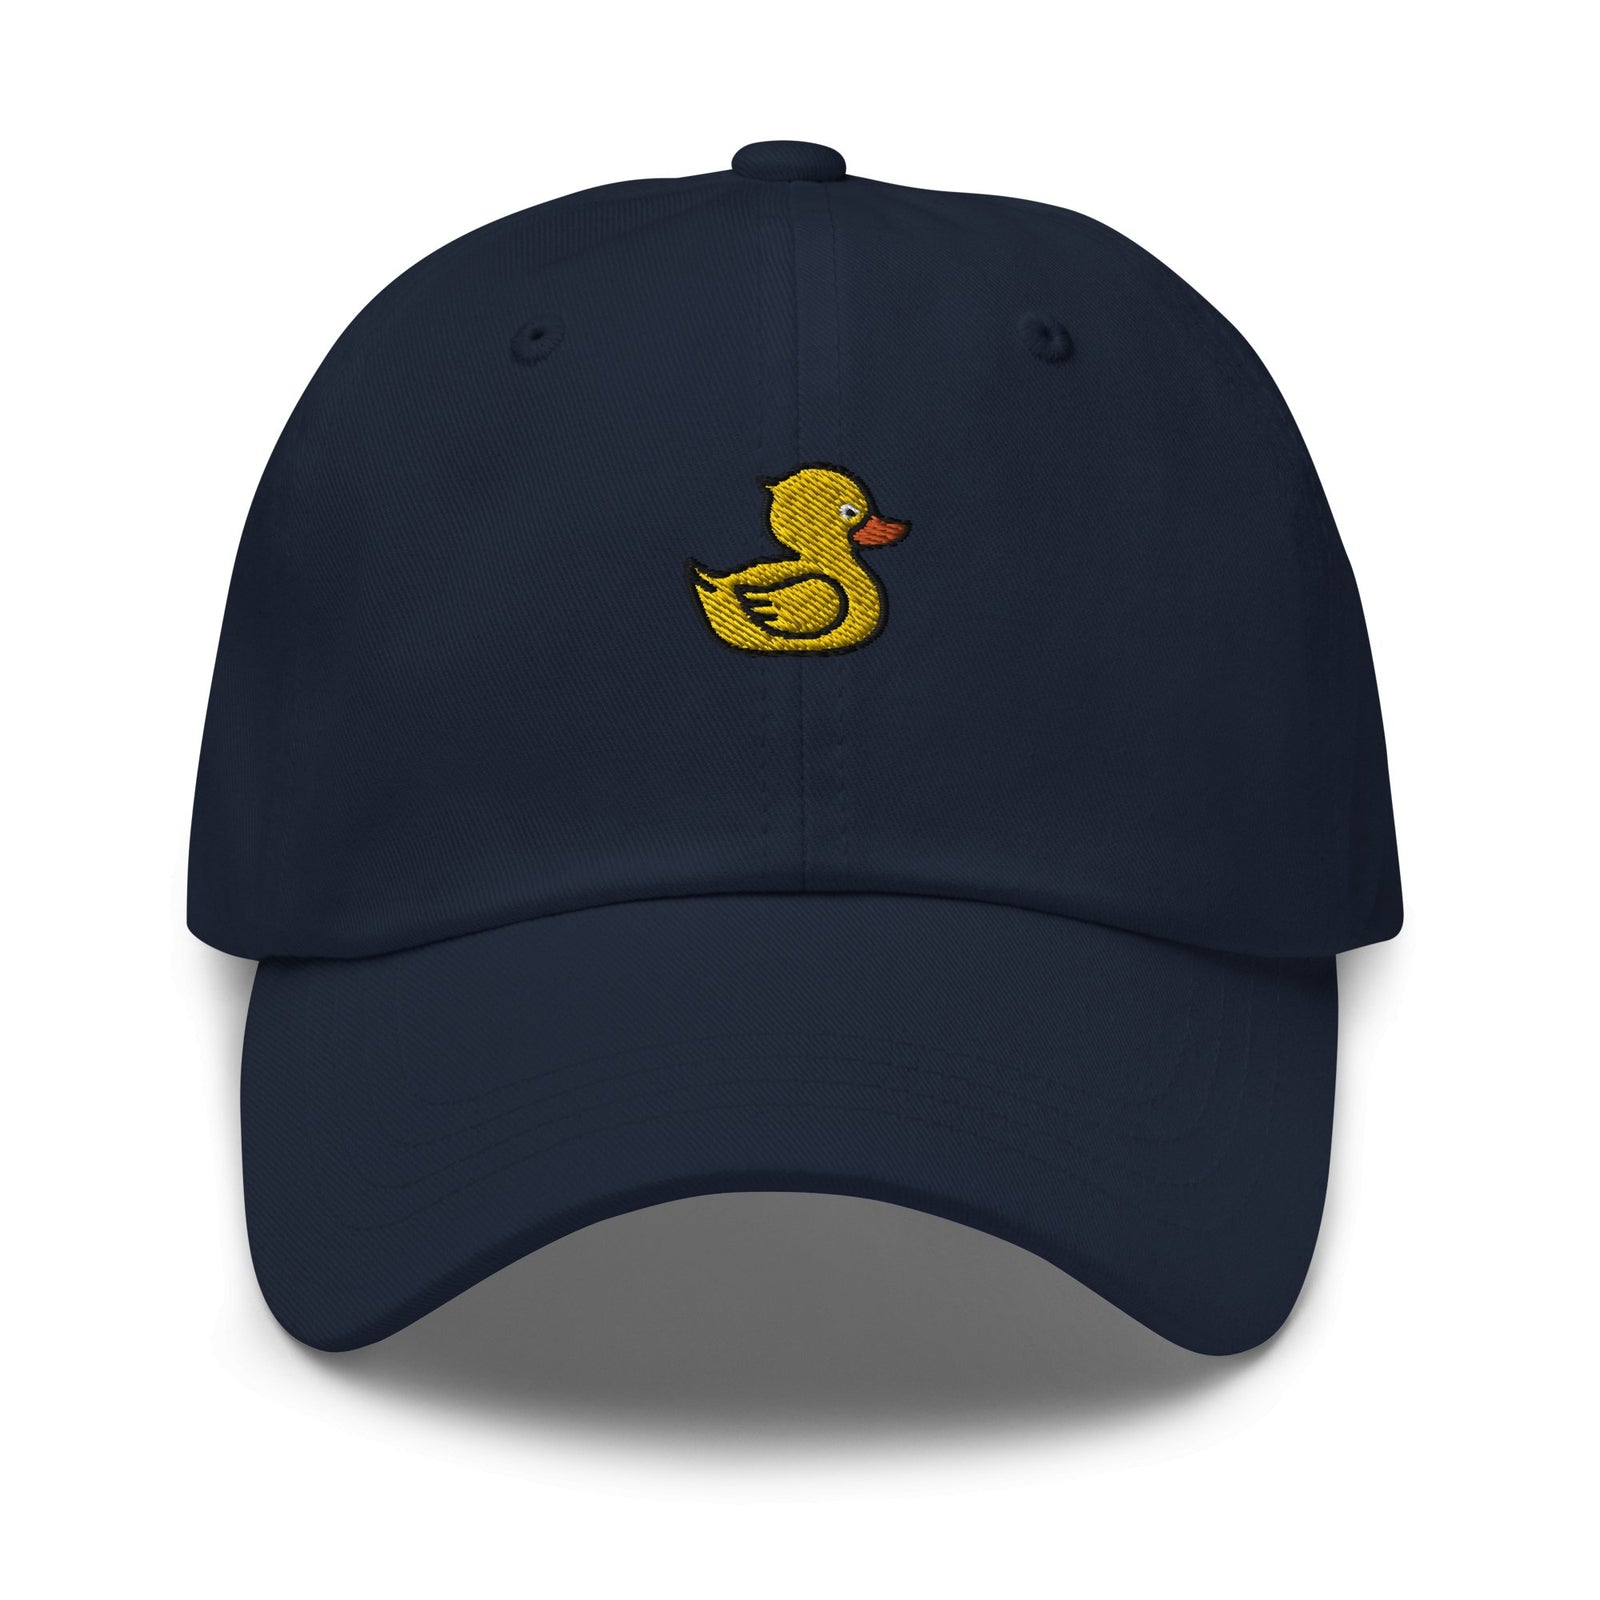 //cdn.shopify.com/s/files/1/0274/2488/2766/products/rubber-ducky-dad-hat-918042_5000x.jpg?v=1652422532 5000w,
    //cdn.shopify.com/s/files/1/0274/2488/2766/products/rubber-ducky-dad-hat-918042_4500x.jpg?v=1652422532 4500w,
    //cdn.shopify.com/s/files/1/0274/2488/2766/products/rubber-ducky-dad-hat-918042_4000x.jpg?v=1652422532 4000w,
    //cdn.shopify.com/s/files/1/0274/2488/2766/products/rubber-ducky-dad-hat-918042_3500x.jpg?v=1652422532 3500w,
    //cdn.shopify.com/s/files/1/0274/2488/2766/products/rubber-ducky-dad-hat-918042_3000x.jpg?v=1652422532 3000w,
    //cdn.shopify.com/s/files/1/0274/2488/2766/products/rubber-ducky-dad-hat-918042_2500x.jpg?v=1652422532 2500w,
    //cdn.shopify.com/s/files/1/0274/2488/2766/products/rubber-ducky-dad-hat-918042_2000x.jpg?v=1652422532 2000w,
    //cdn.shopify.com/s/files/1/0274/2488/2766/products/rubber-ducky-dad-hat-918042_1800x.jpg?v=1652422532 1800w,
    //cdn.shopify.com/s/files/1/0274/2488/2766/products/rubber-ducky-dad-hat-918042_1600x.jpg?v=1652422532 1600w,
    //cdn.shopify.com/s/files/1/0274/2488/2766/products/rubber-ducky-dad-hat-918042_1400x.jpg?v=1652422532 1400w,
    //cdn.shopify.com/s/files/1/0274/2488/2766/products/rubber-ducky-dad-hat-918042_1200x.jpg?v=1652422532 1200w,
    //cdn.shopify.com/s/files/1/0274/2488/2766/products/rubber-ducky-dad-hat-918042_1000x.jpg?v=1652422532 1000w,
    //cdn.shopify.com/s/files/1/0274/2488/2766/products/rubber-ducky-dad-hat-918042_800x.jpg?v=1652422532 800w,
    //cdn.shopify.com/s/files/1/0274/2488/2766/products/rubber-ducky-dad-hat-918042_600x.jpg?v=1652422532 600w,
    //cdn.shopify.com/s/files/1/0274/2488/2766/products/rubber-ducky-dad-hat-918042_400x.jpg?v=1652422532 400w,
    //cdn.shopify.com/s/files/1/0274/2488/2766/products/rubber-ducky-dad-hat-918042_200x.jpg?v=1652422532 200w